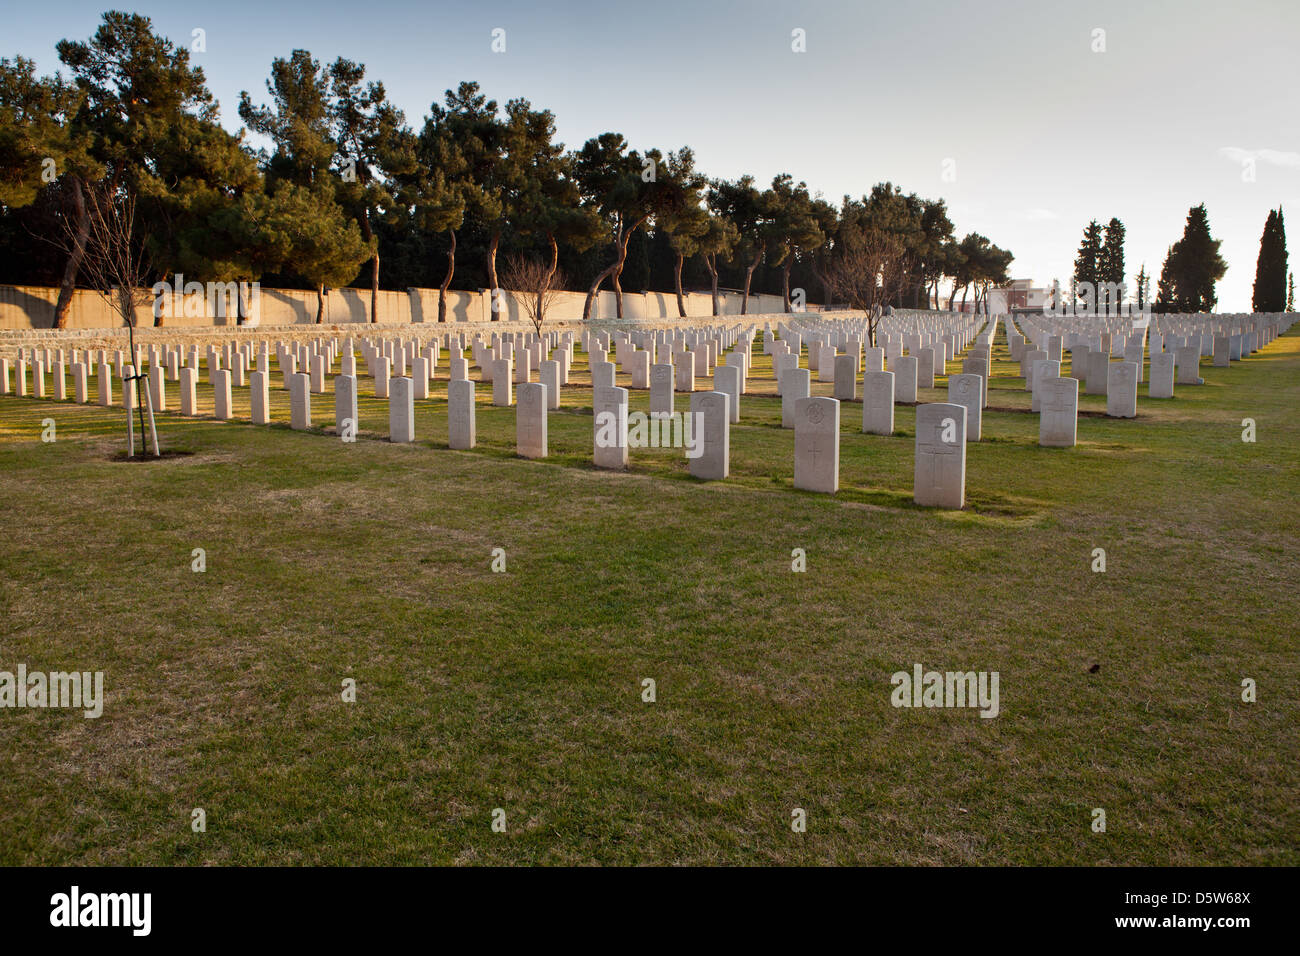 The Mikra British Cemetery in the city of Thessaloniki in the Region of Central Macedonia, Greece. Stock Photo